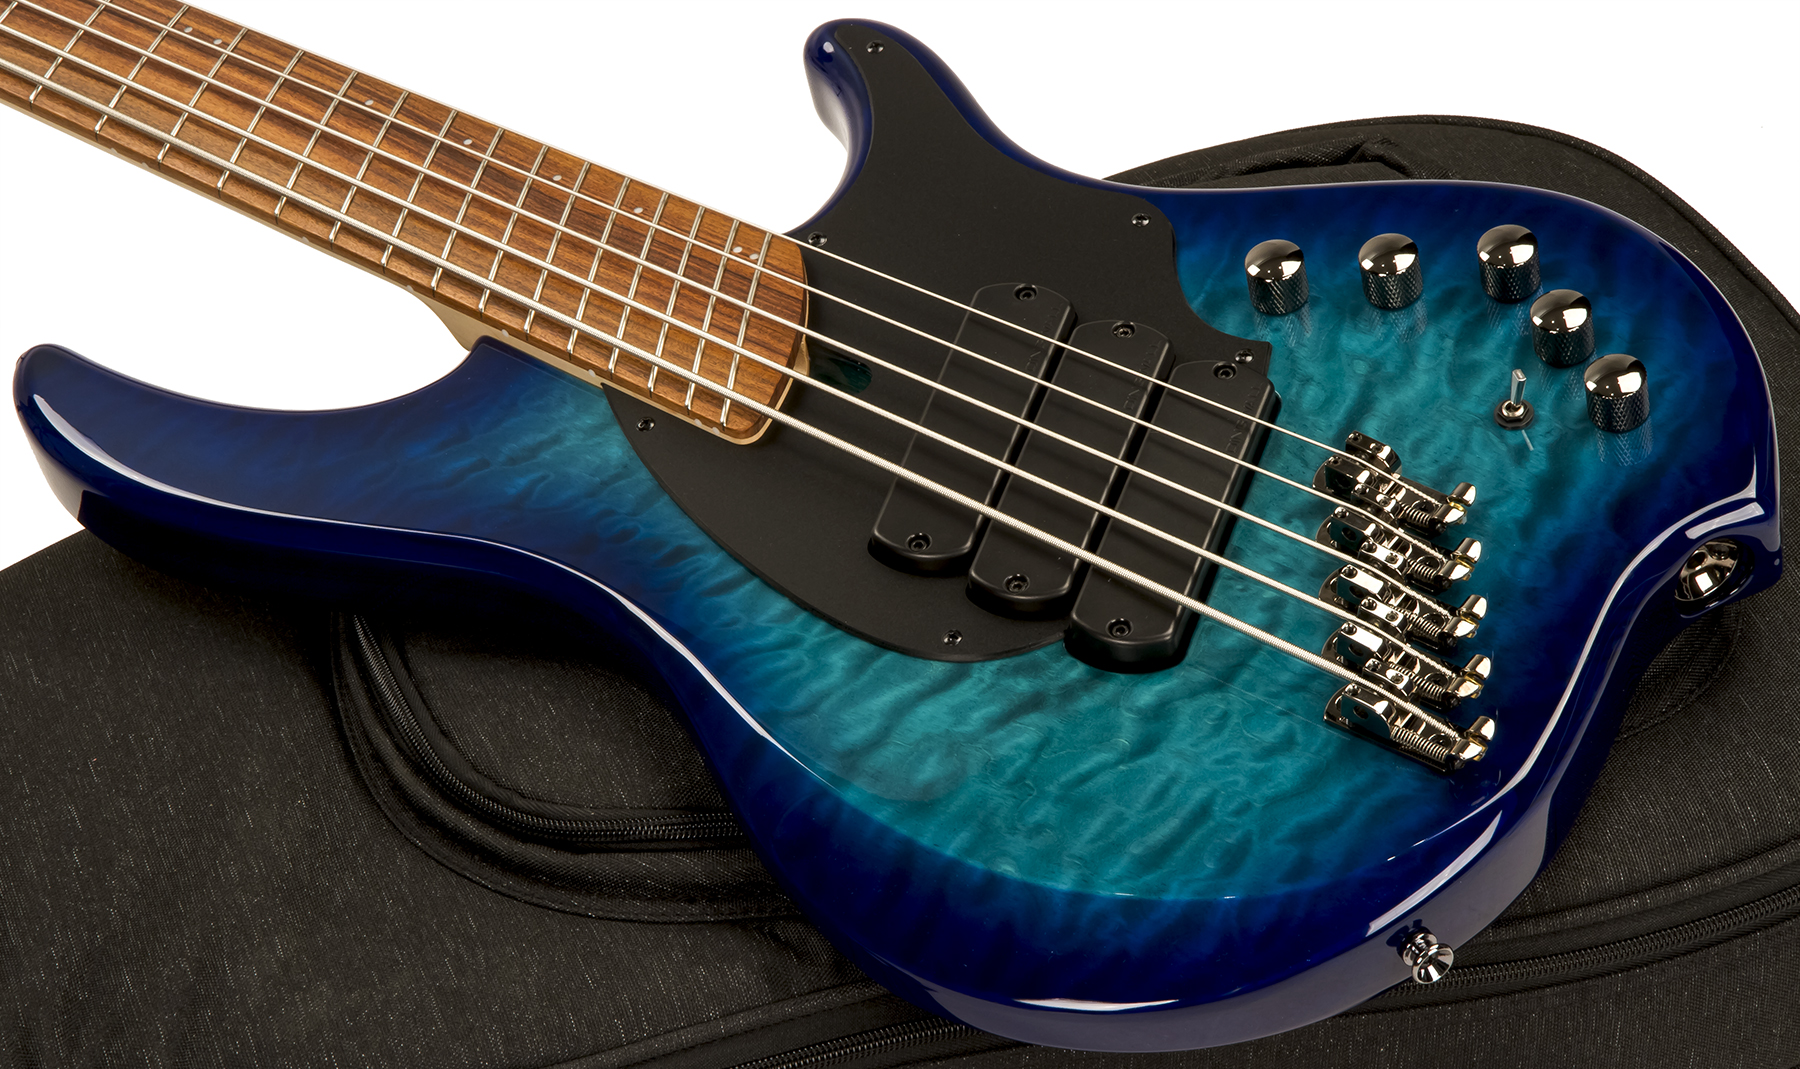 Dingwall Combustion 5 3-pickups Pf +housse - Whalepool Burst - Solidbody E-bass - Variation 2